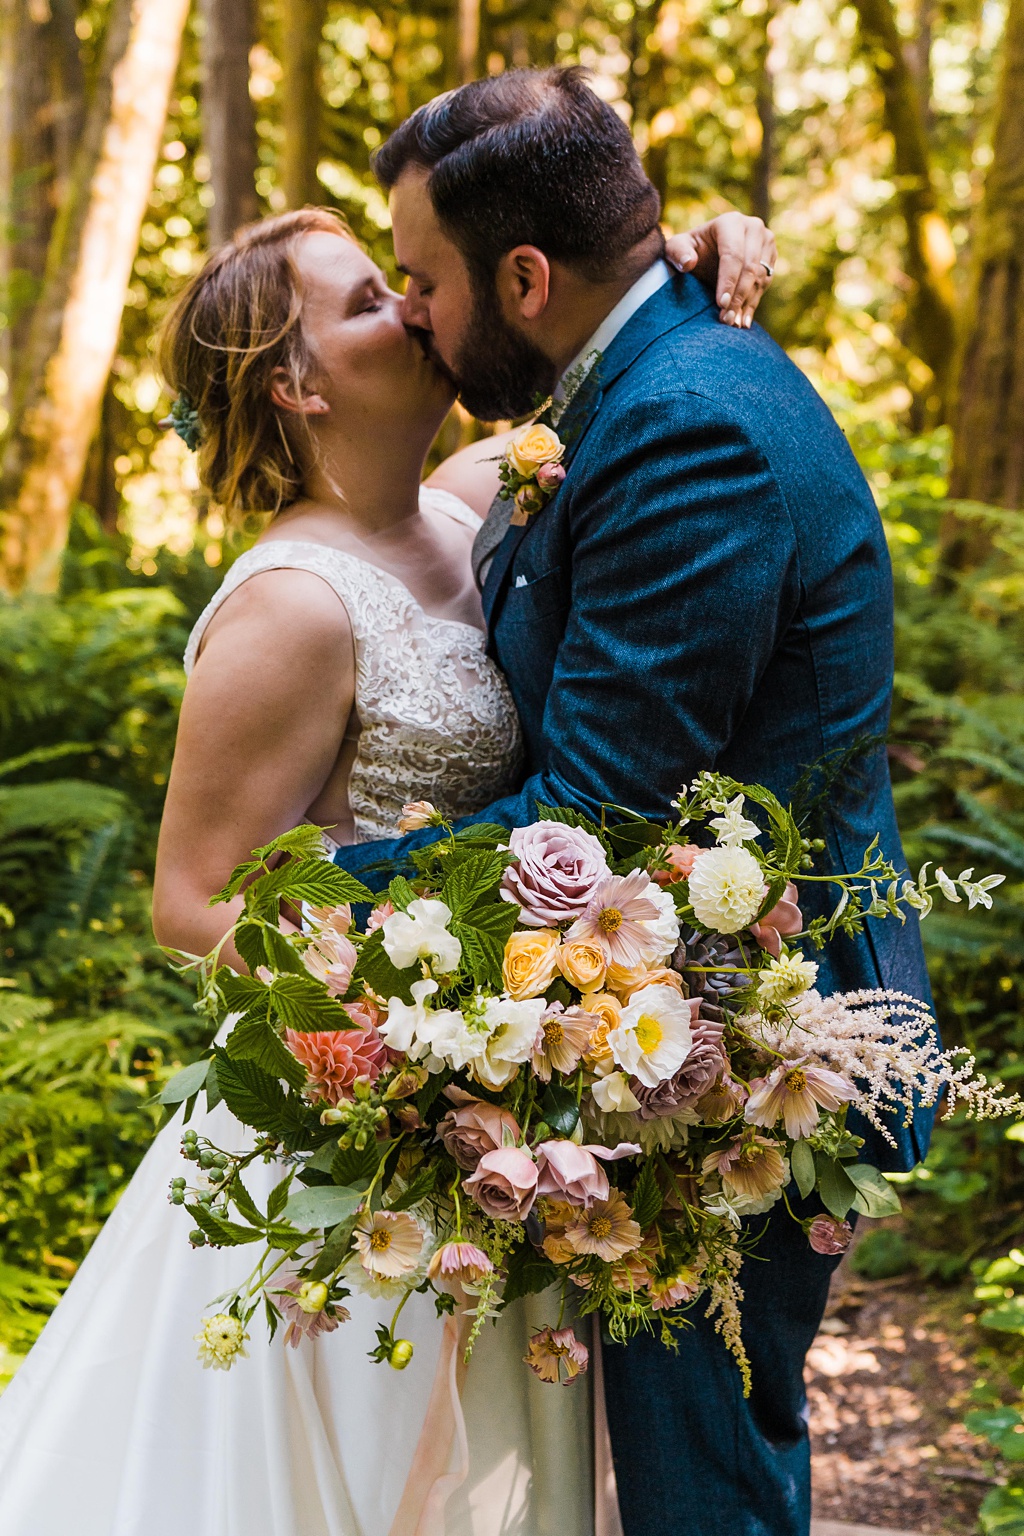 A bride and groom kiss in the woods holding a bouquet